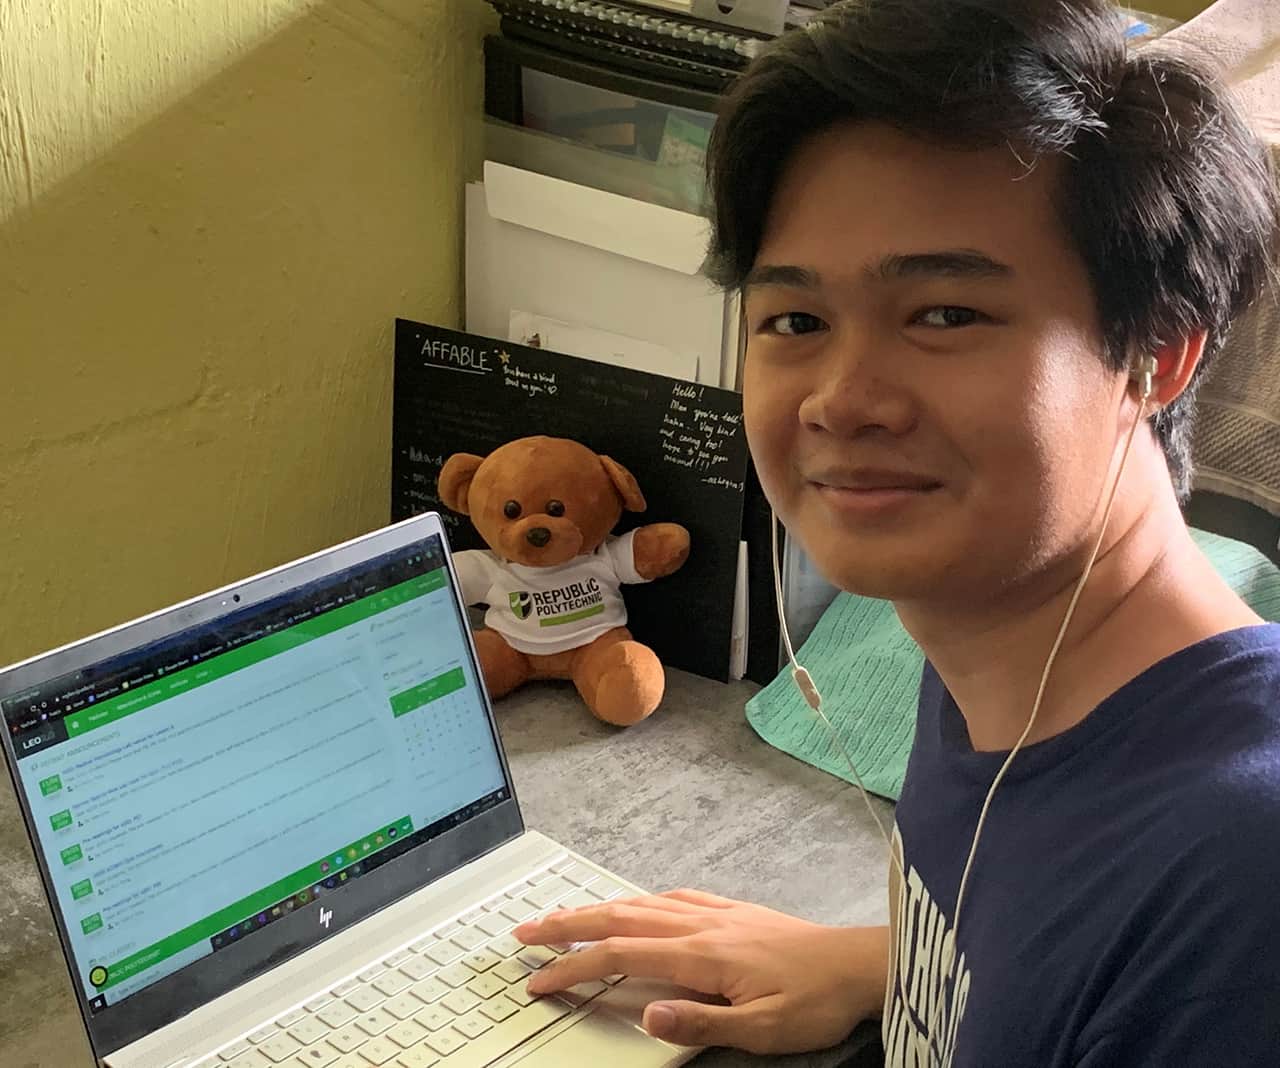 Republic Polytechnic student Morier Adam, 19, went from attending classroom discussions and interactive seminars to online lessons at home via LEO2.0